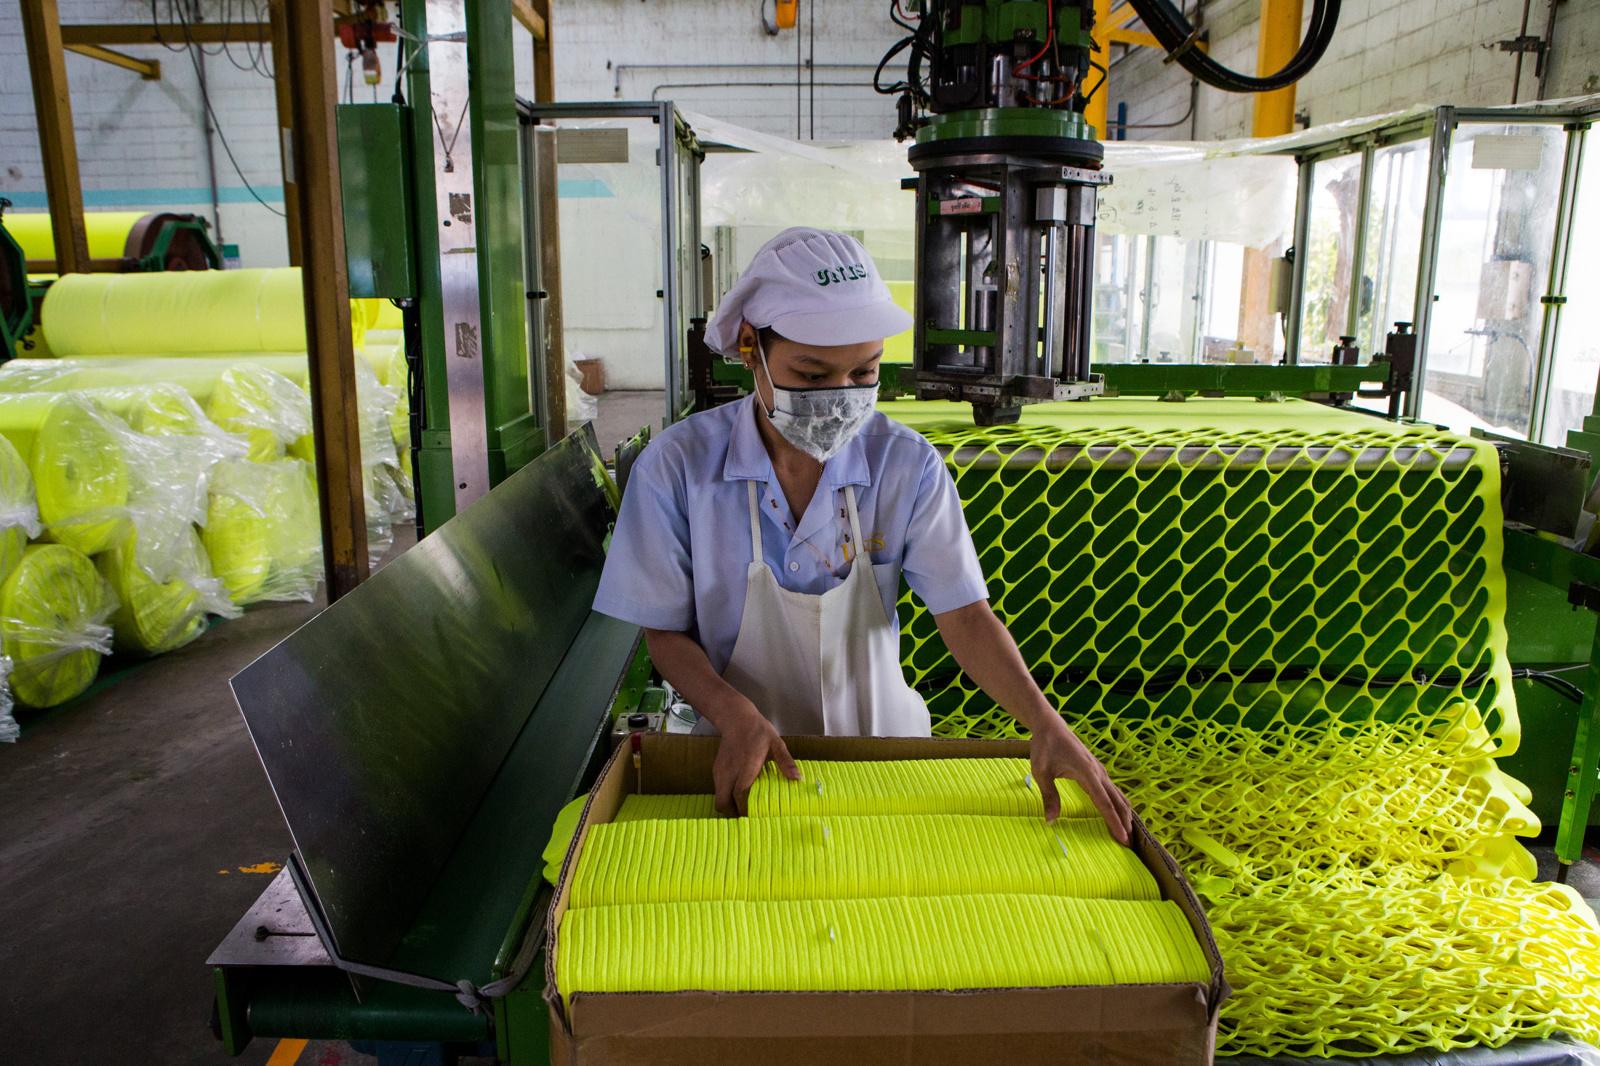 Wilson Tennis Ball Factory - For The New York Times - Nakhon Pathom, Thailand Ð August 18, 2016 : An automated...